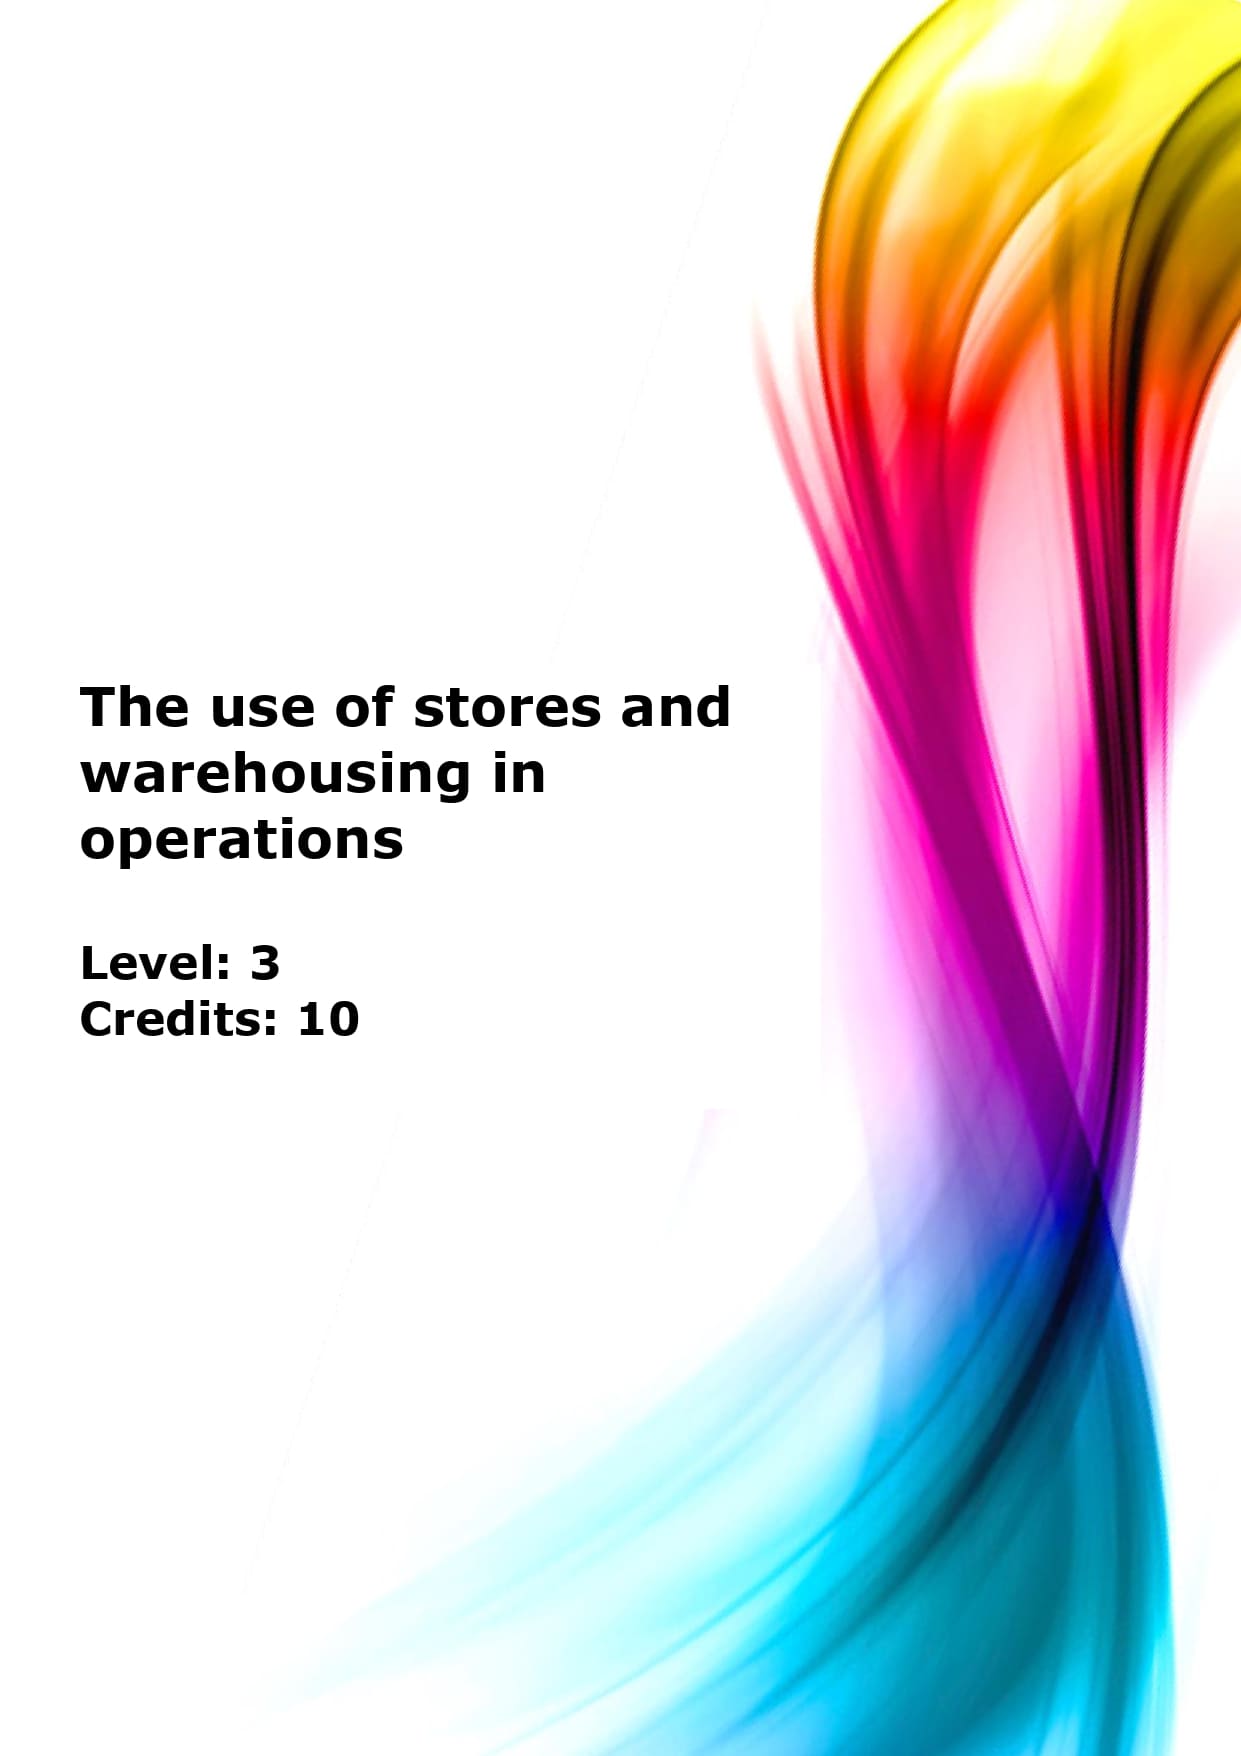 Describe the use of stores and warehousing in operations US